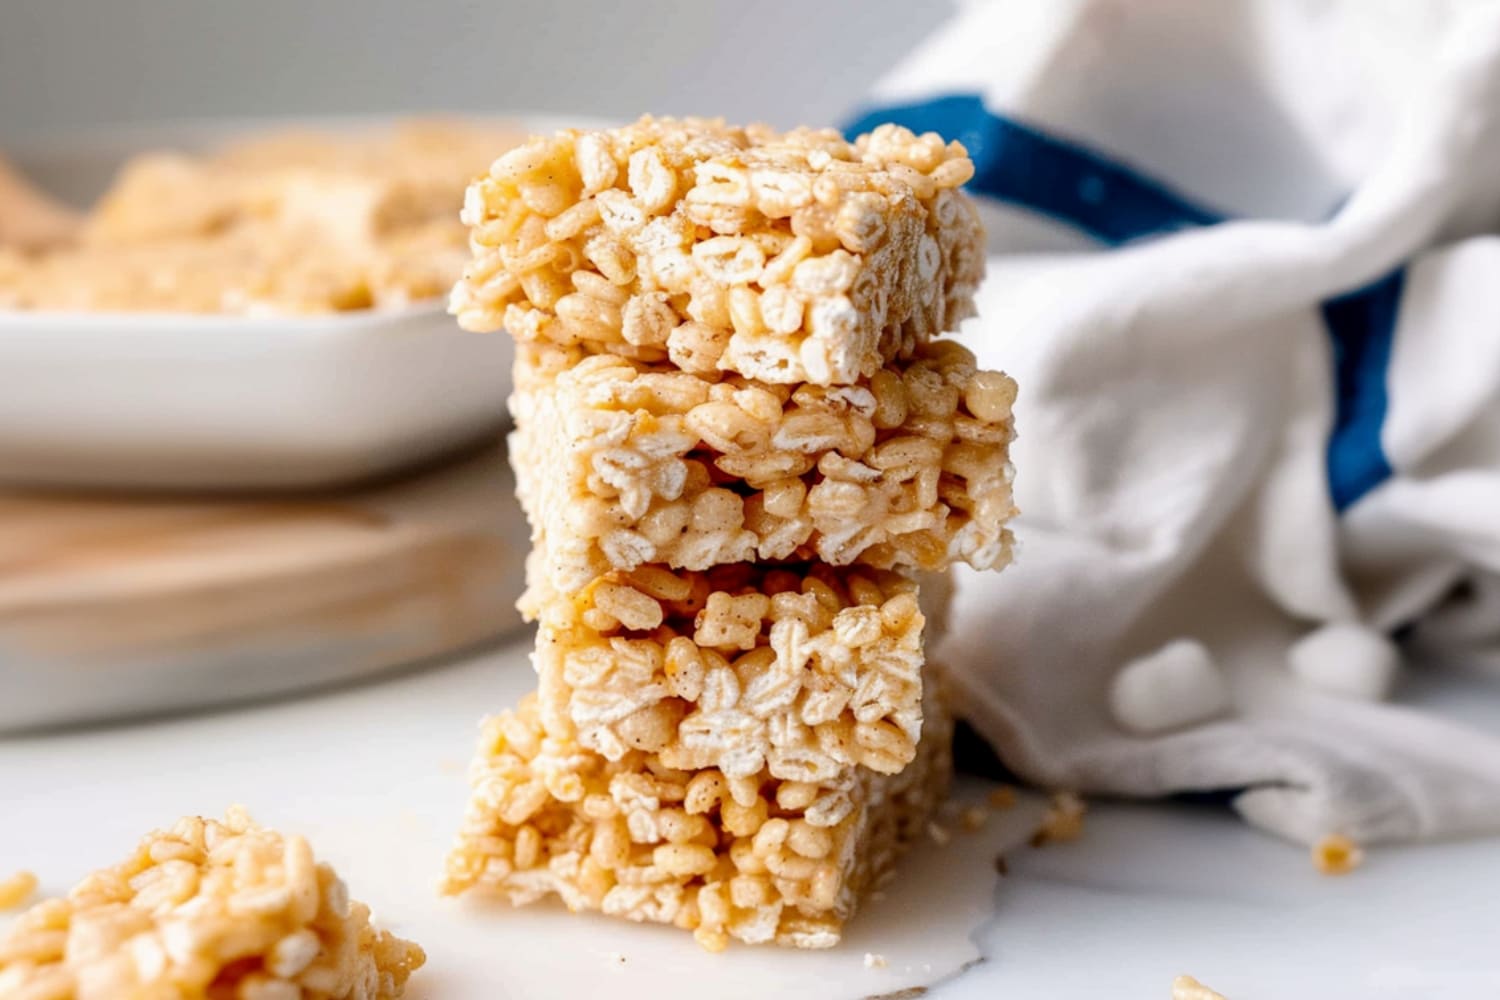 Chewy, gooey and crispy homemade brown butter rice krispie treats